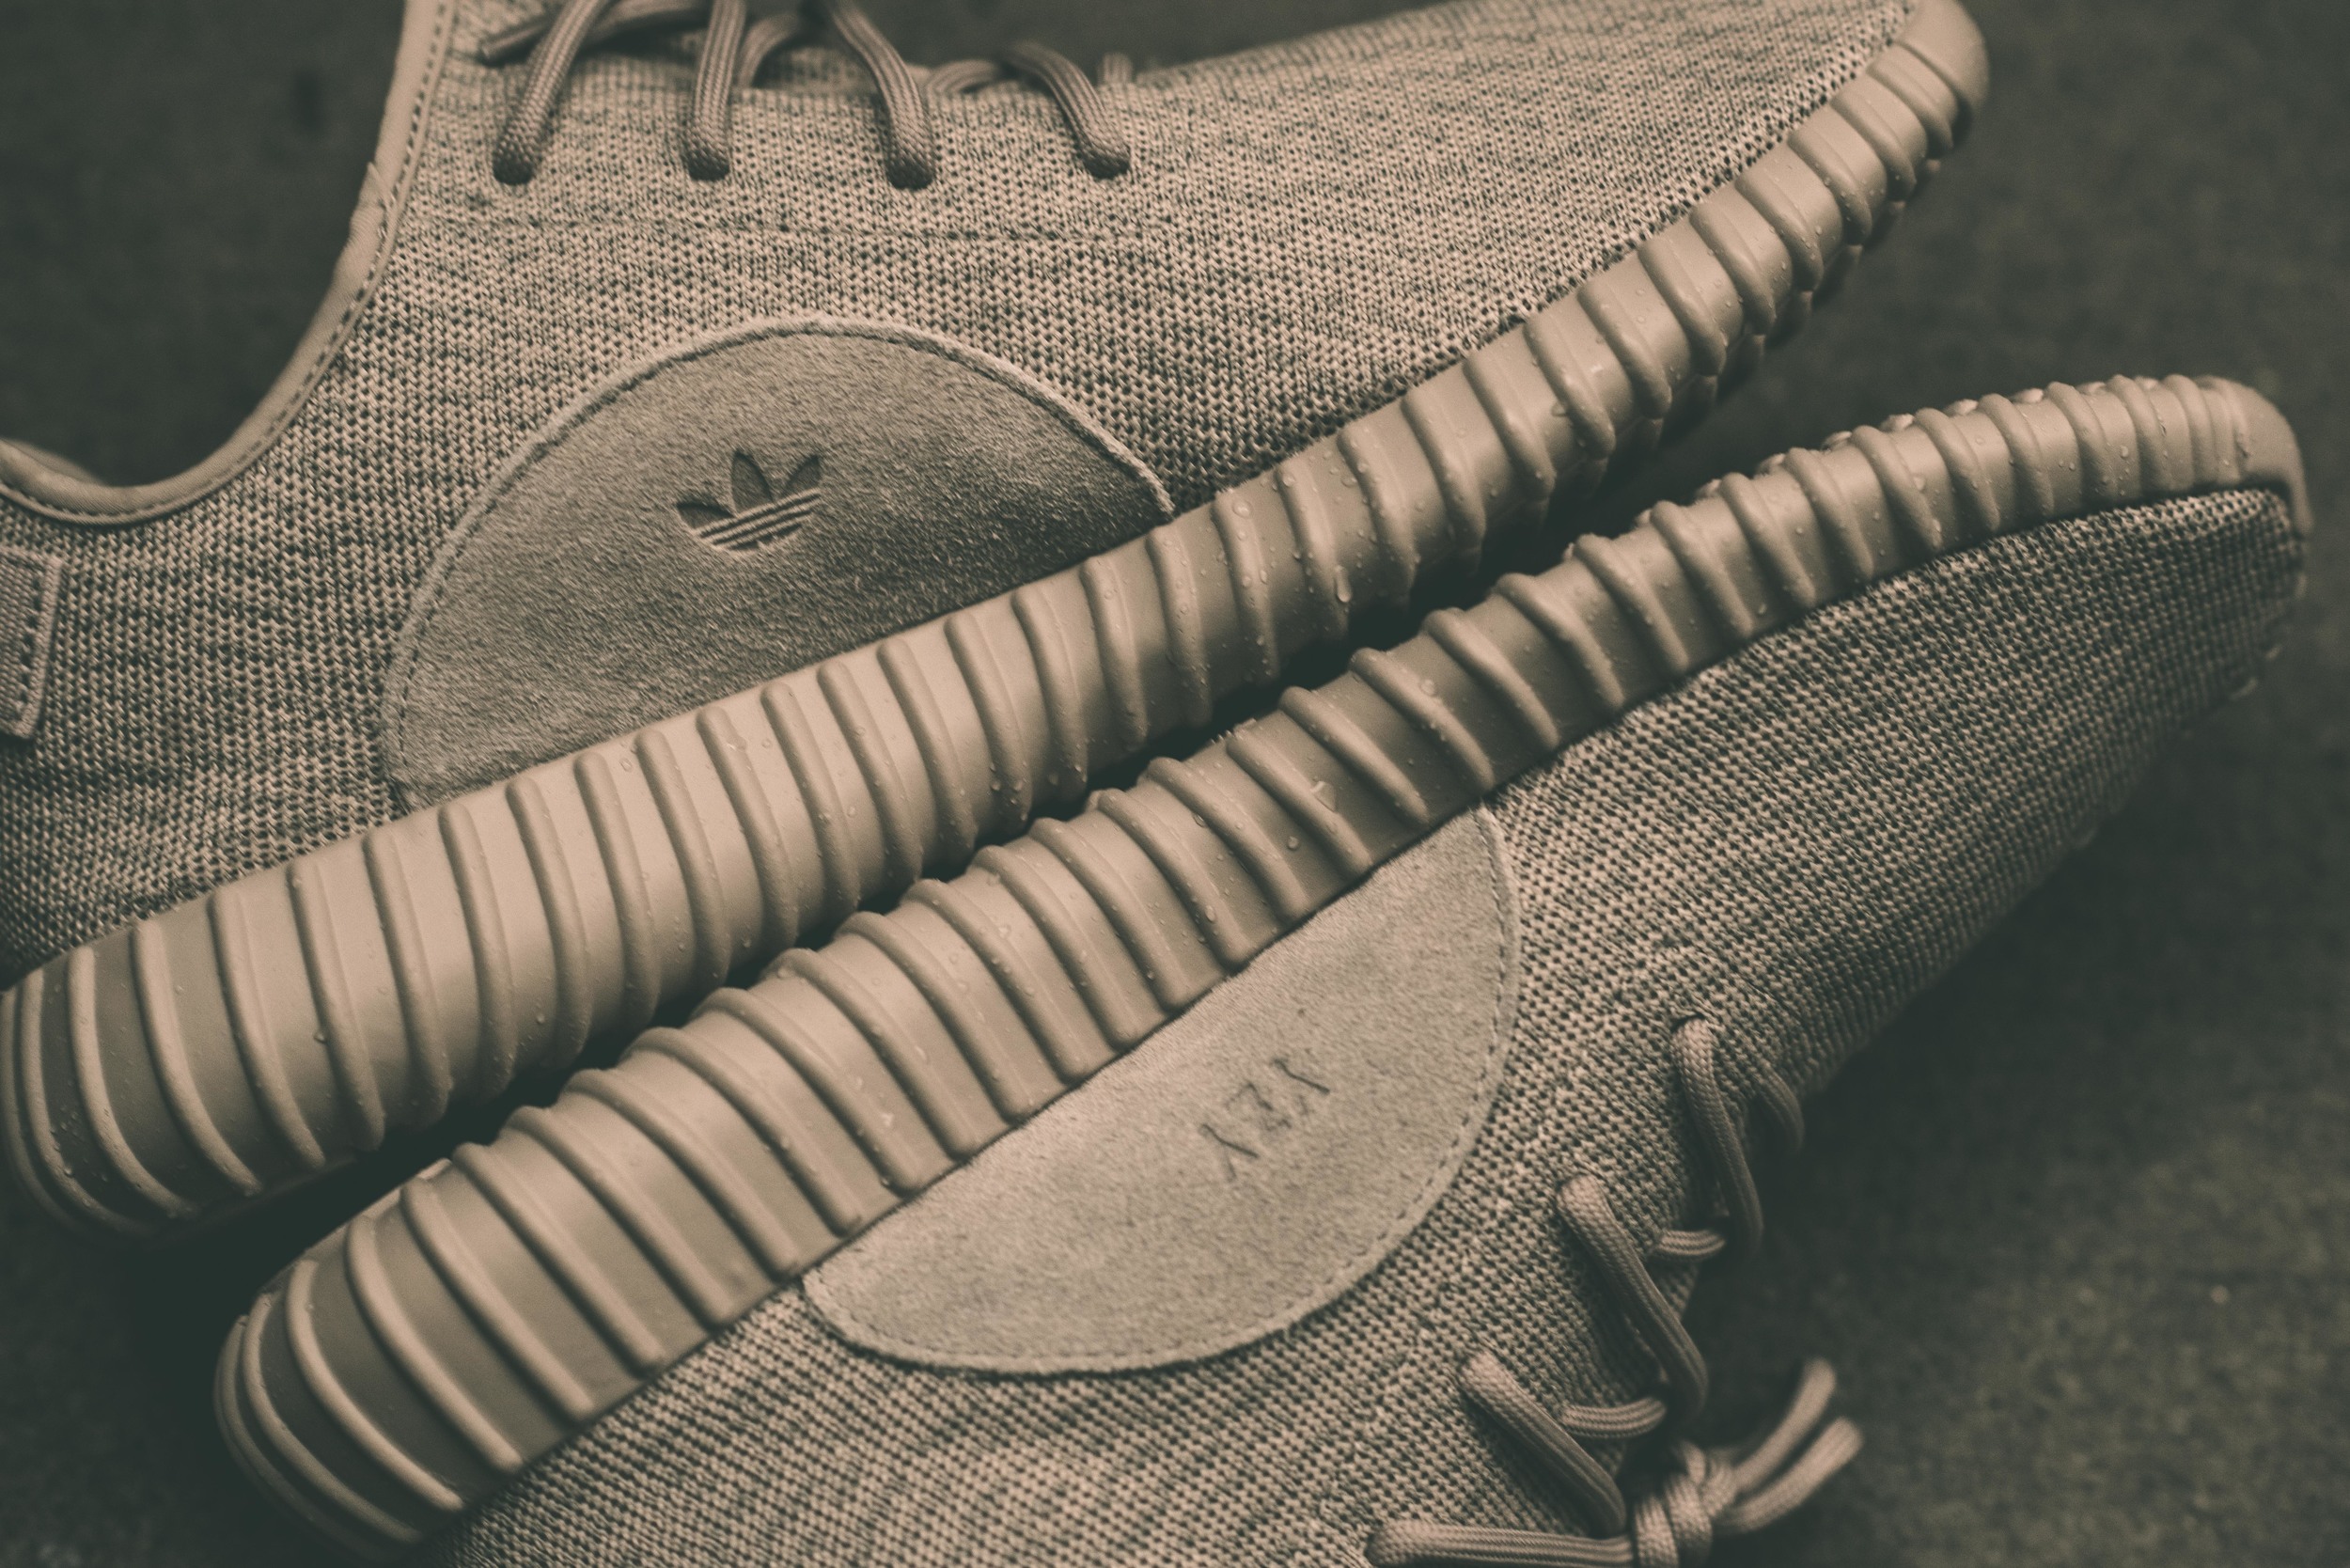 Adidas Yeezy Boost 350 "Oxford Tan" In-Store Raffle Details — Epitome